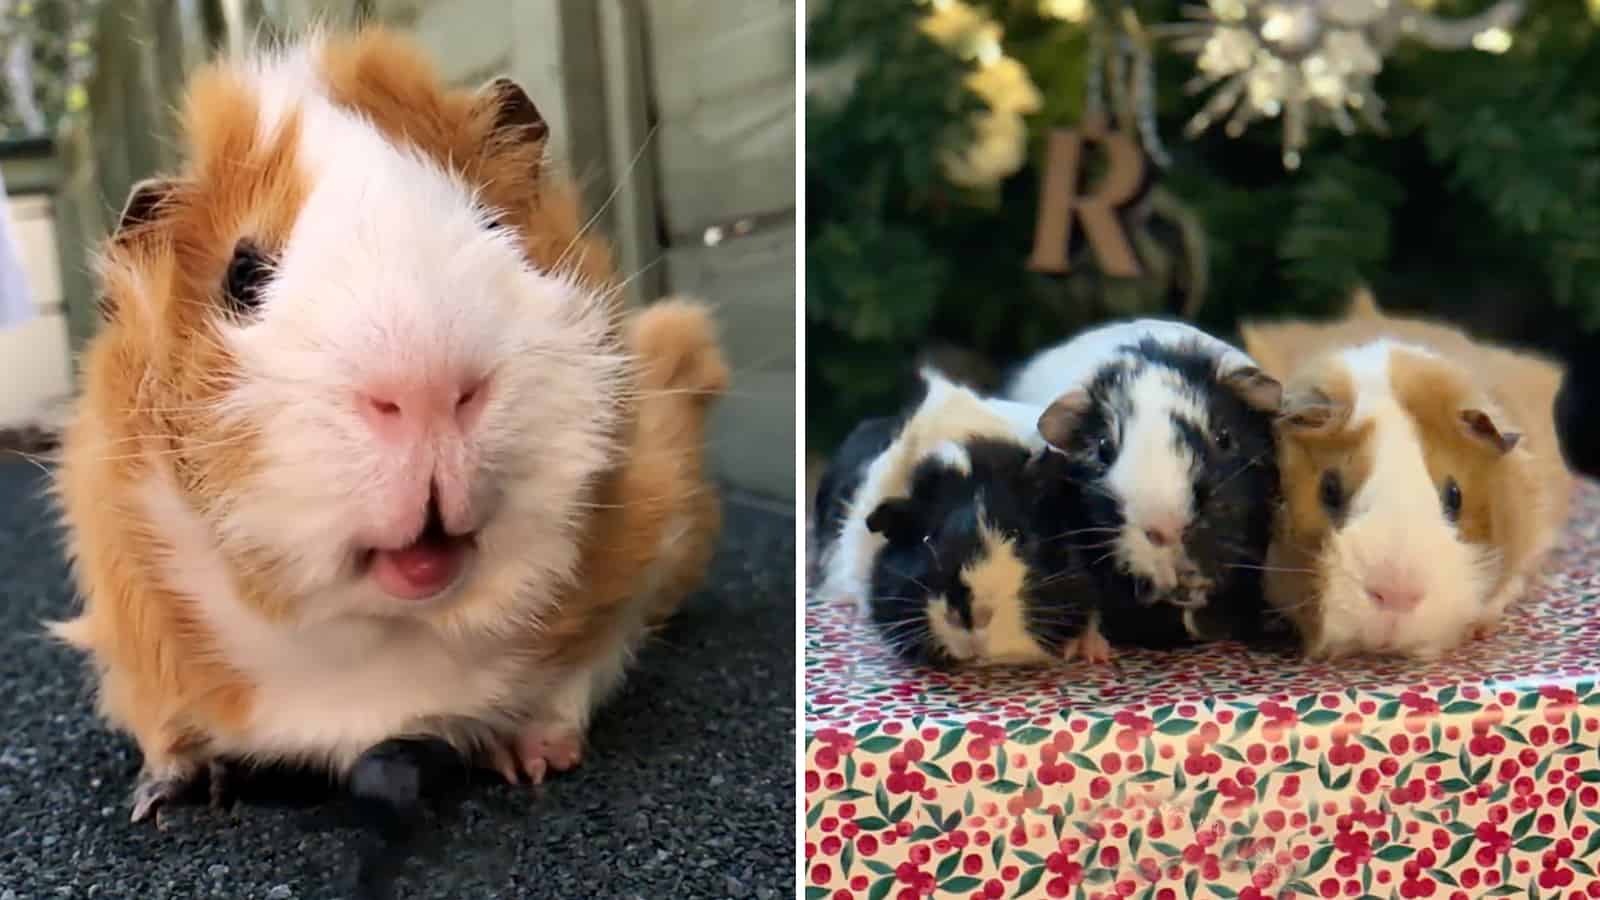 This Adorable Guinea Pig Family Is Taking the Internet by Storm